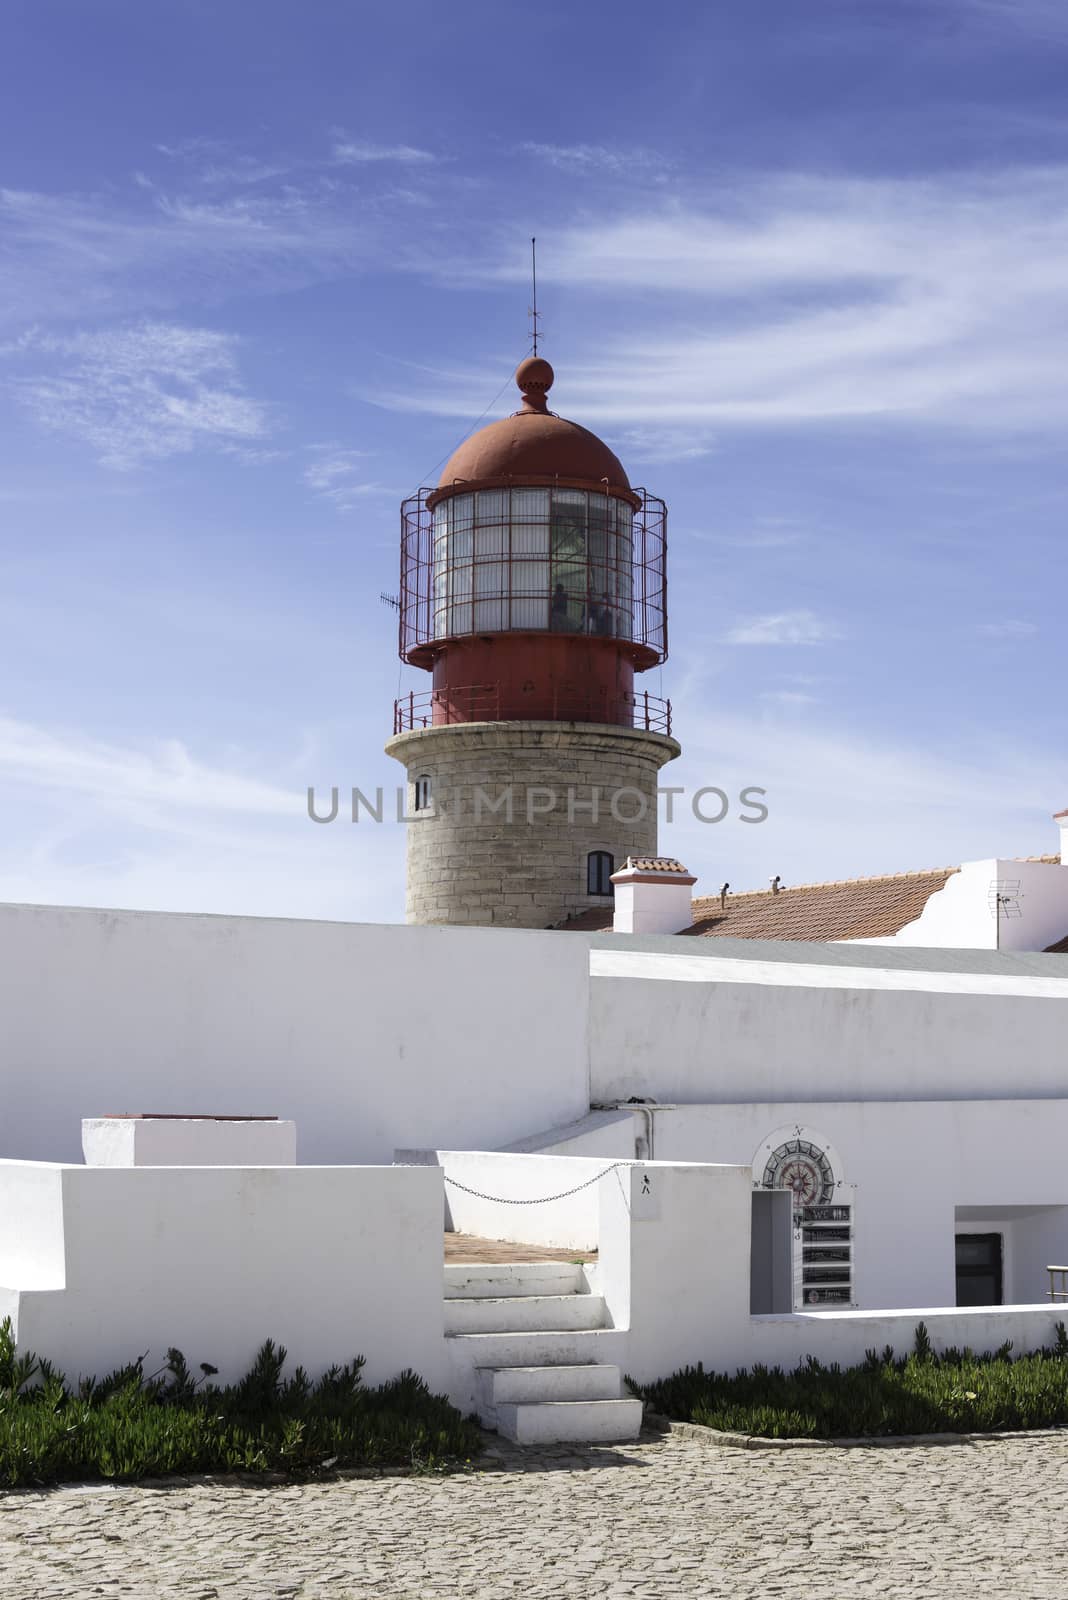 Portugal Algarve Region Sagres Lighthouse at "Cape Saint Vincent" - "Cabo Sao Vicente" - Continental Europe's most South-westerly point